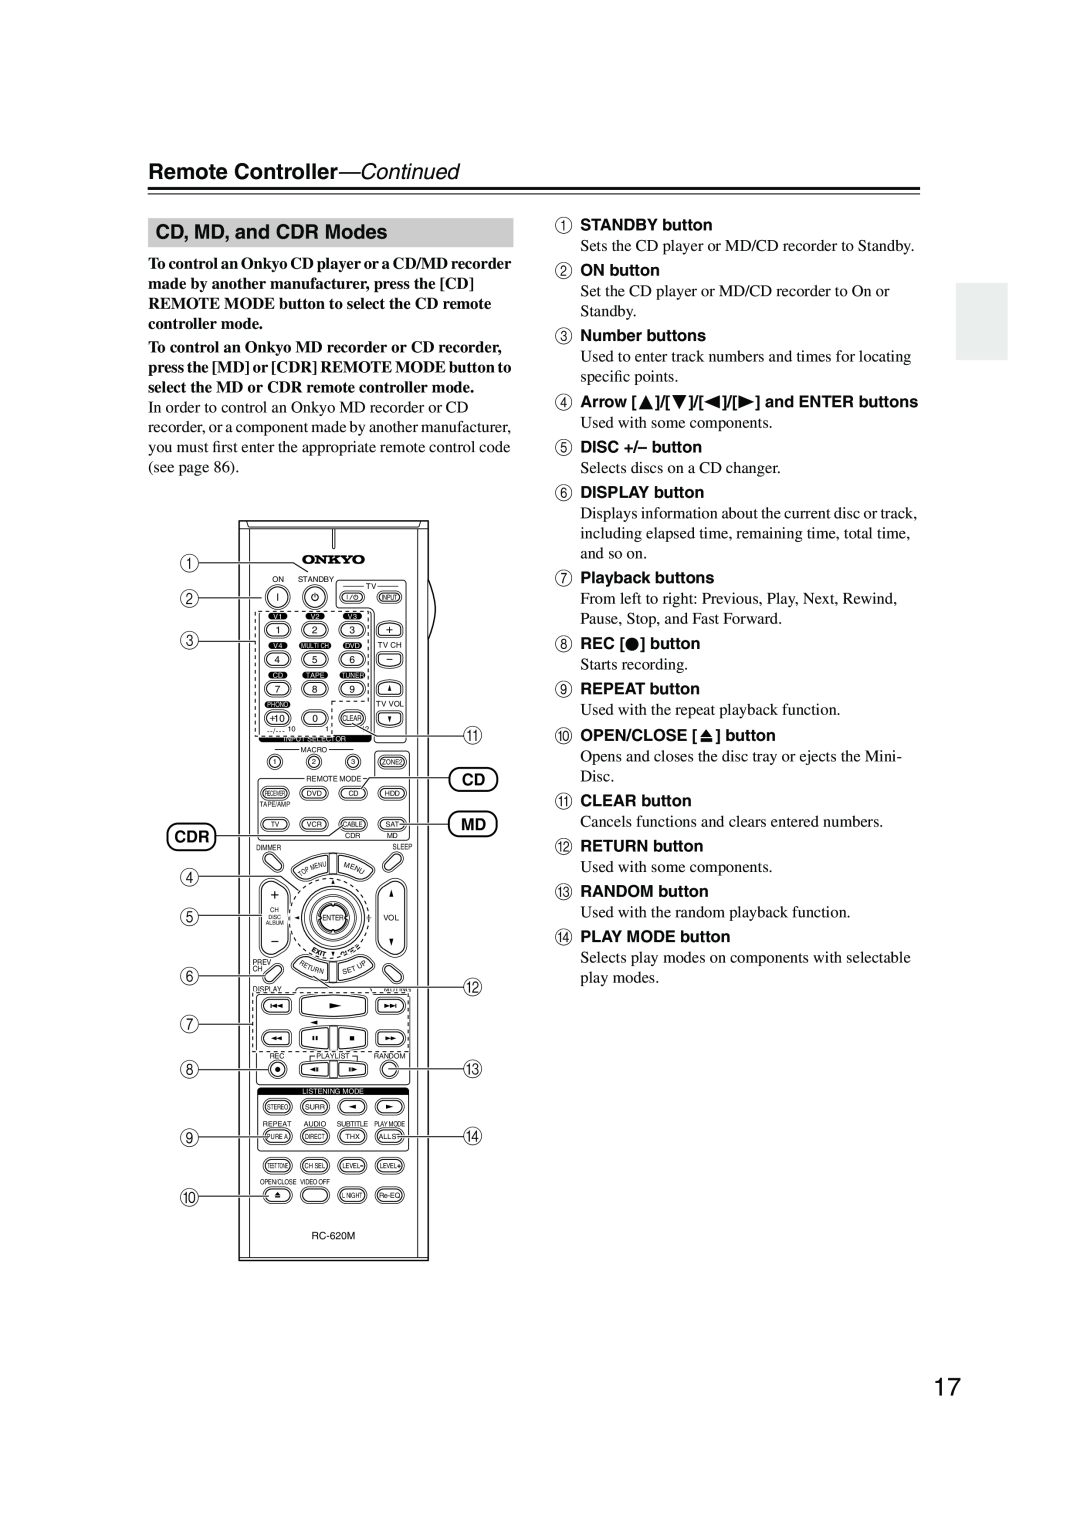 Onkyo SR804 instruction manual CD, MD, and CDR Modes, Remote Controller—Continued 